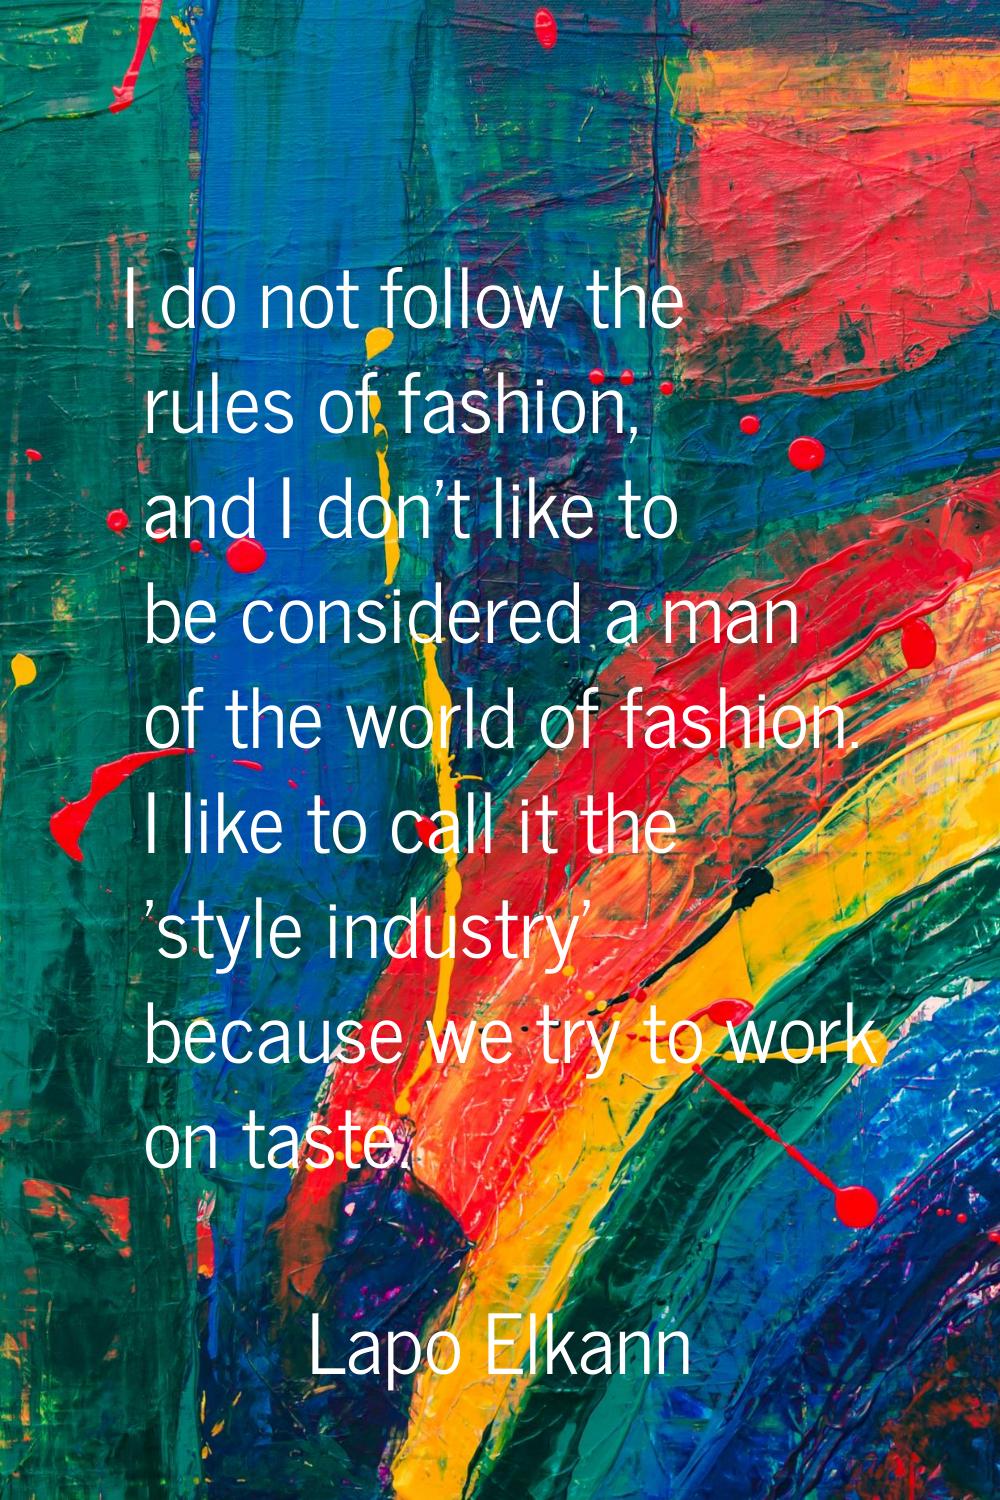 I do not follow the rules of fashion, and I don't like to be considered a man of the world of fashi